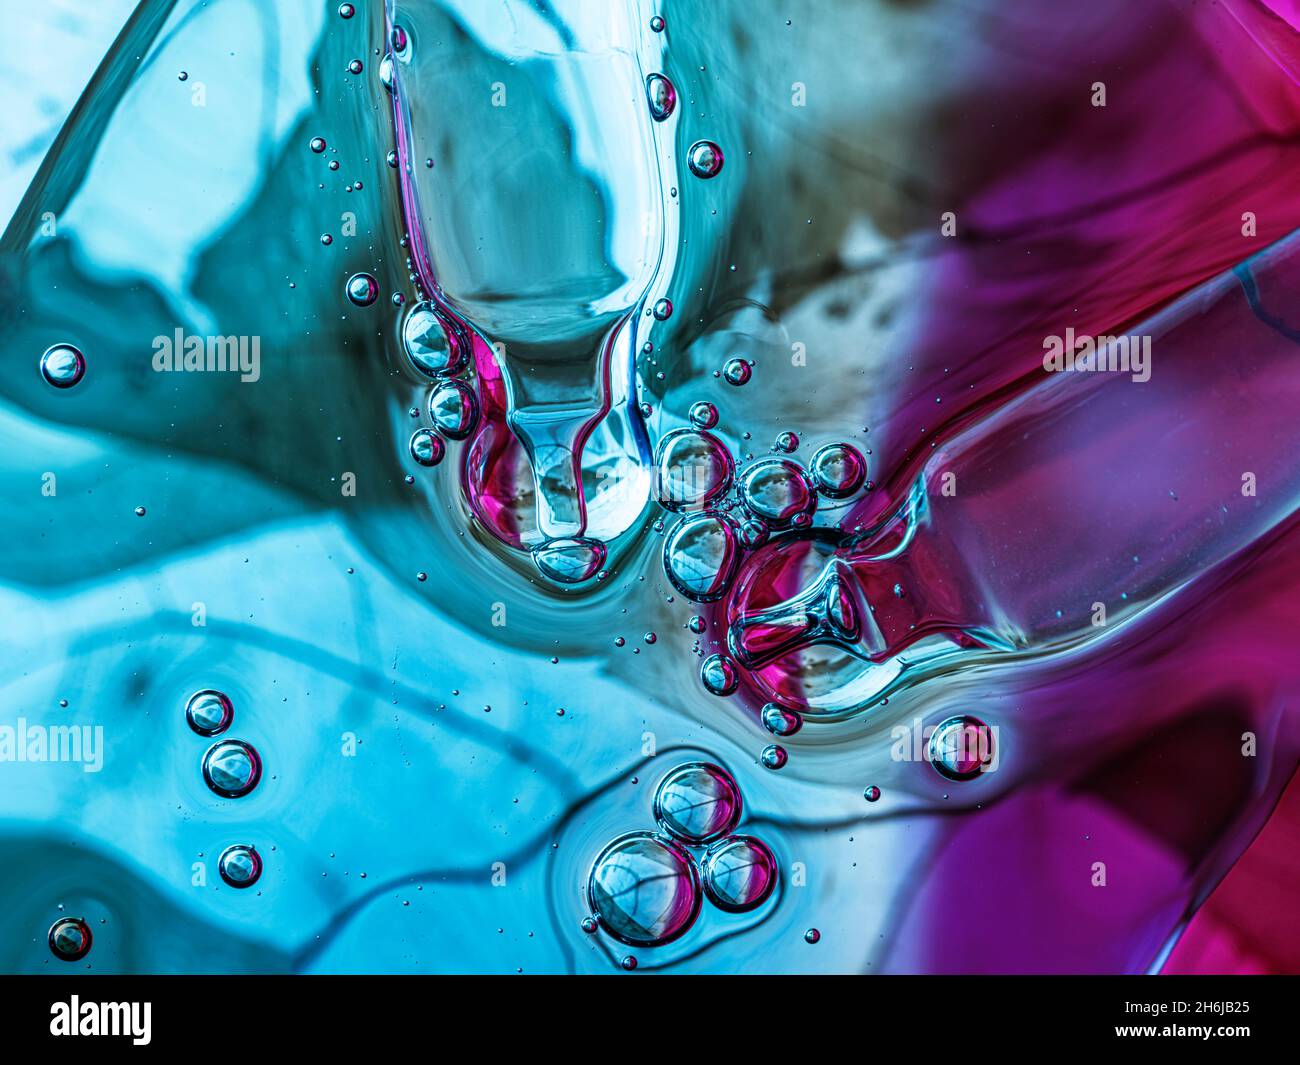 Liquid serum and dropper on blue and pink background with leaf texture. Front view. Stock Photo